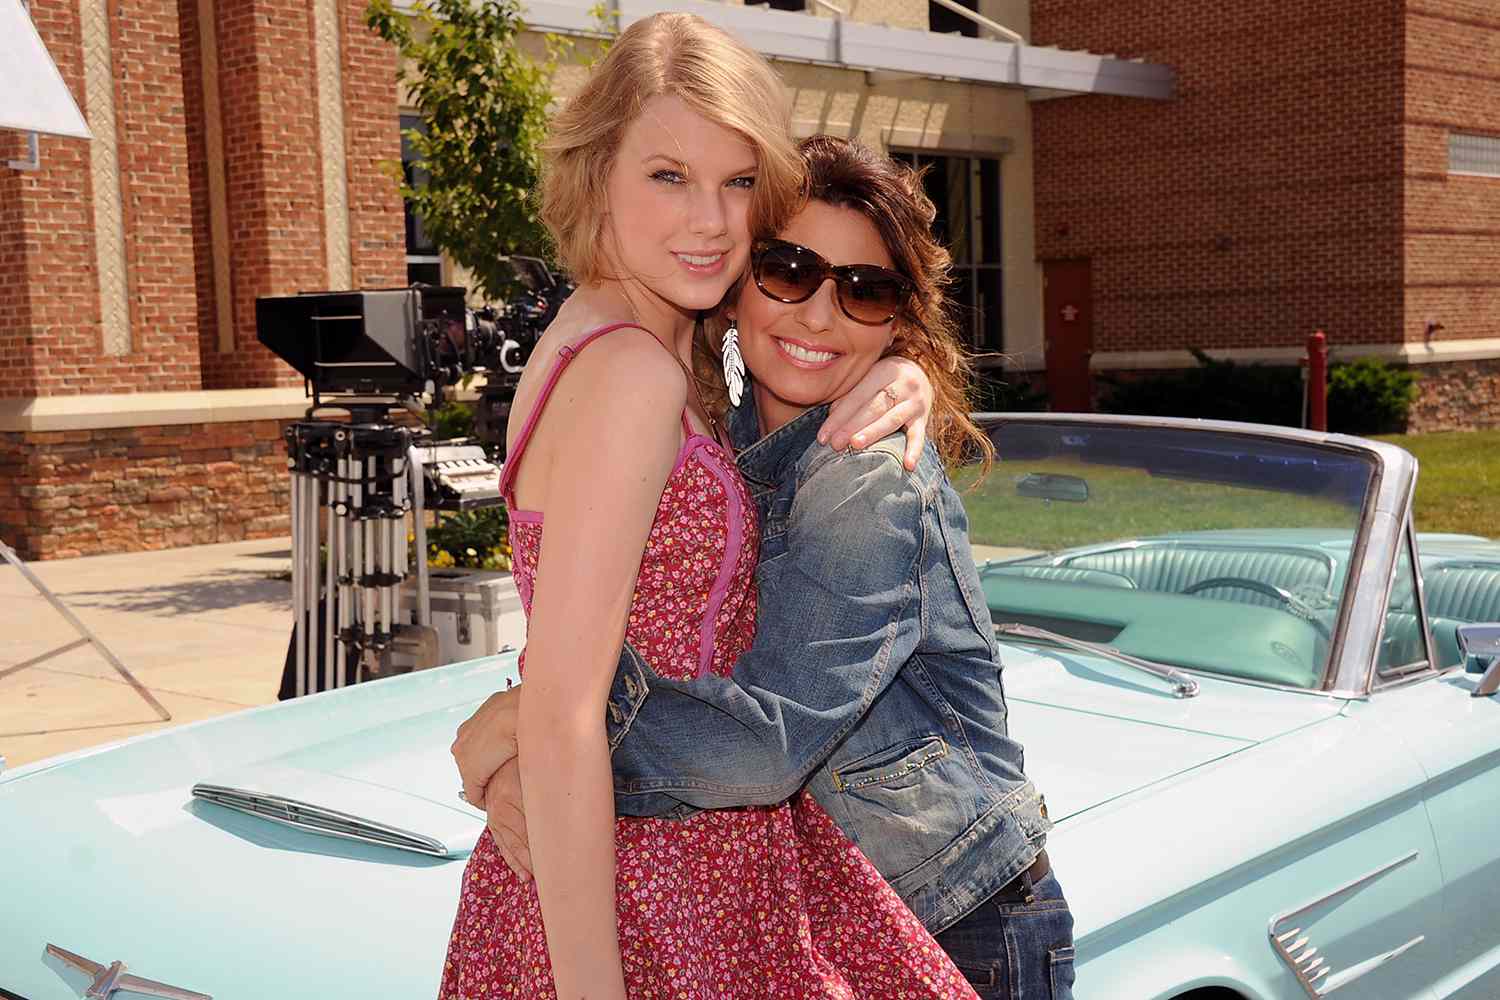 Singers & Songwriters Taylor Swift and Shania Twain during the recreation of "Thelma & Louise" for CMT Music Awards airing on June 8, 2011 8pm EST on CMT Country Music TV. 